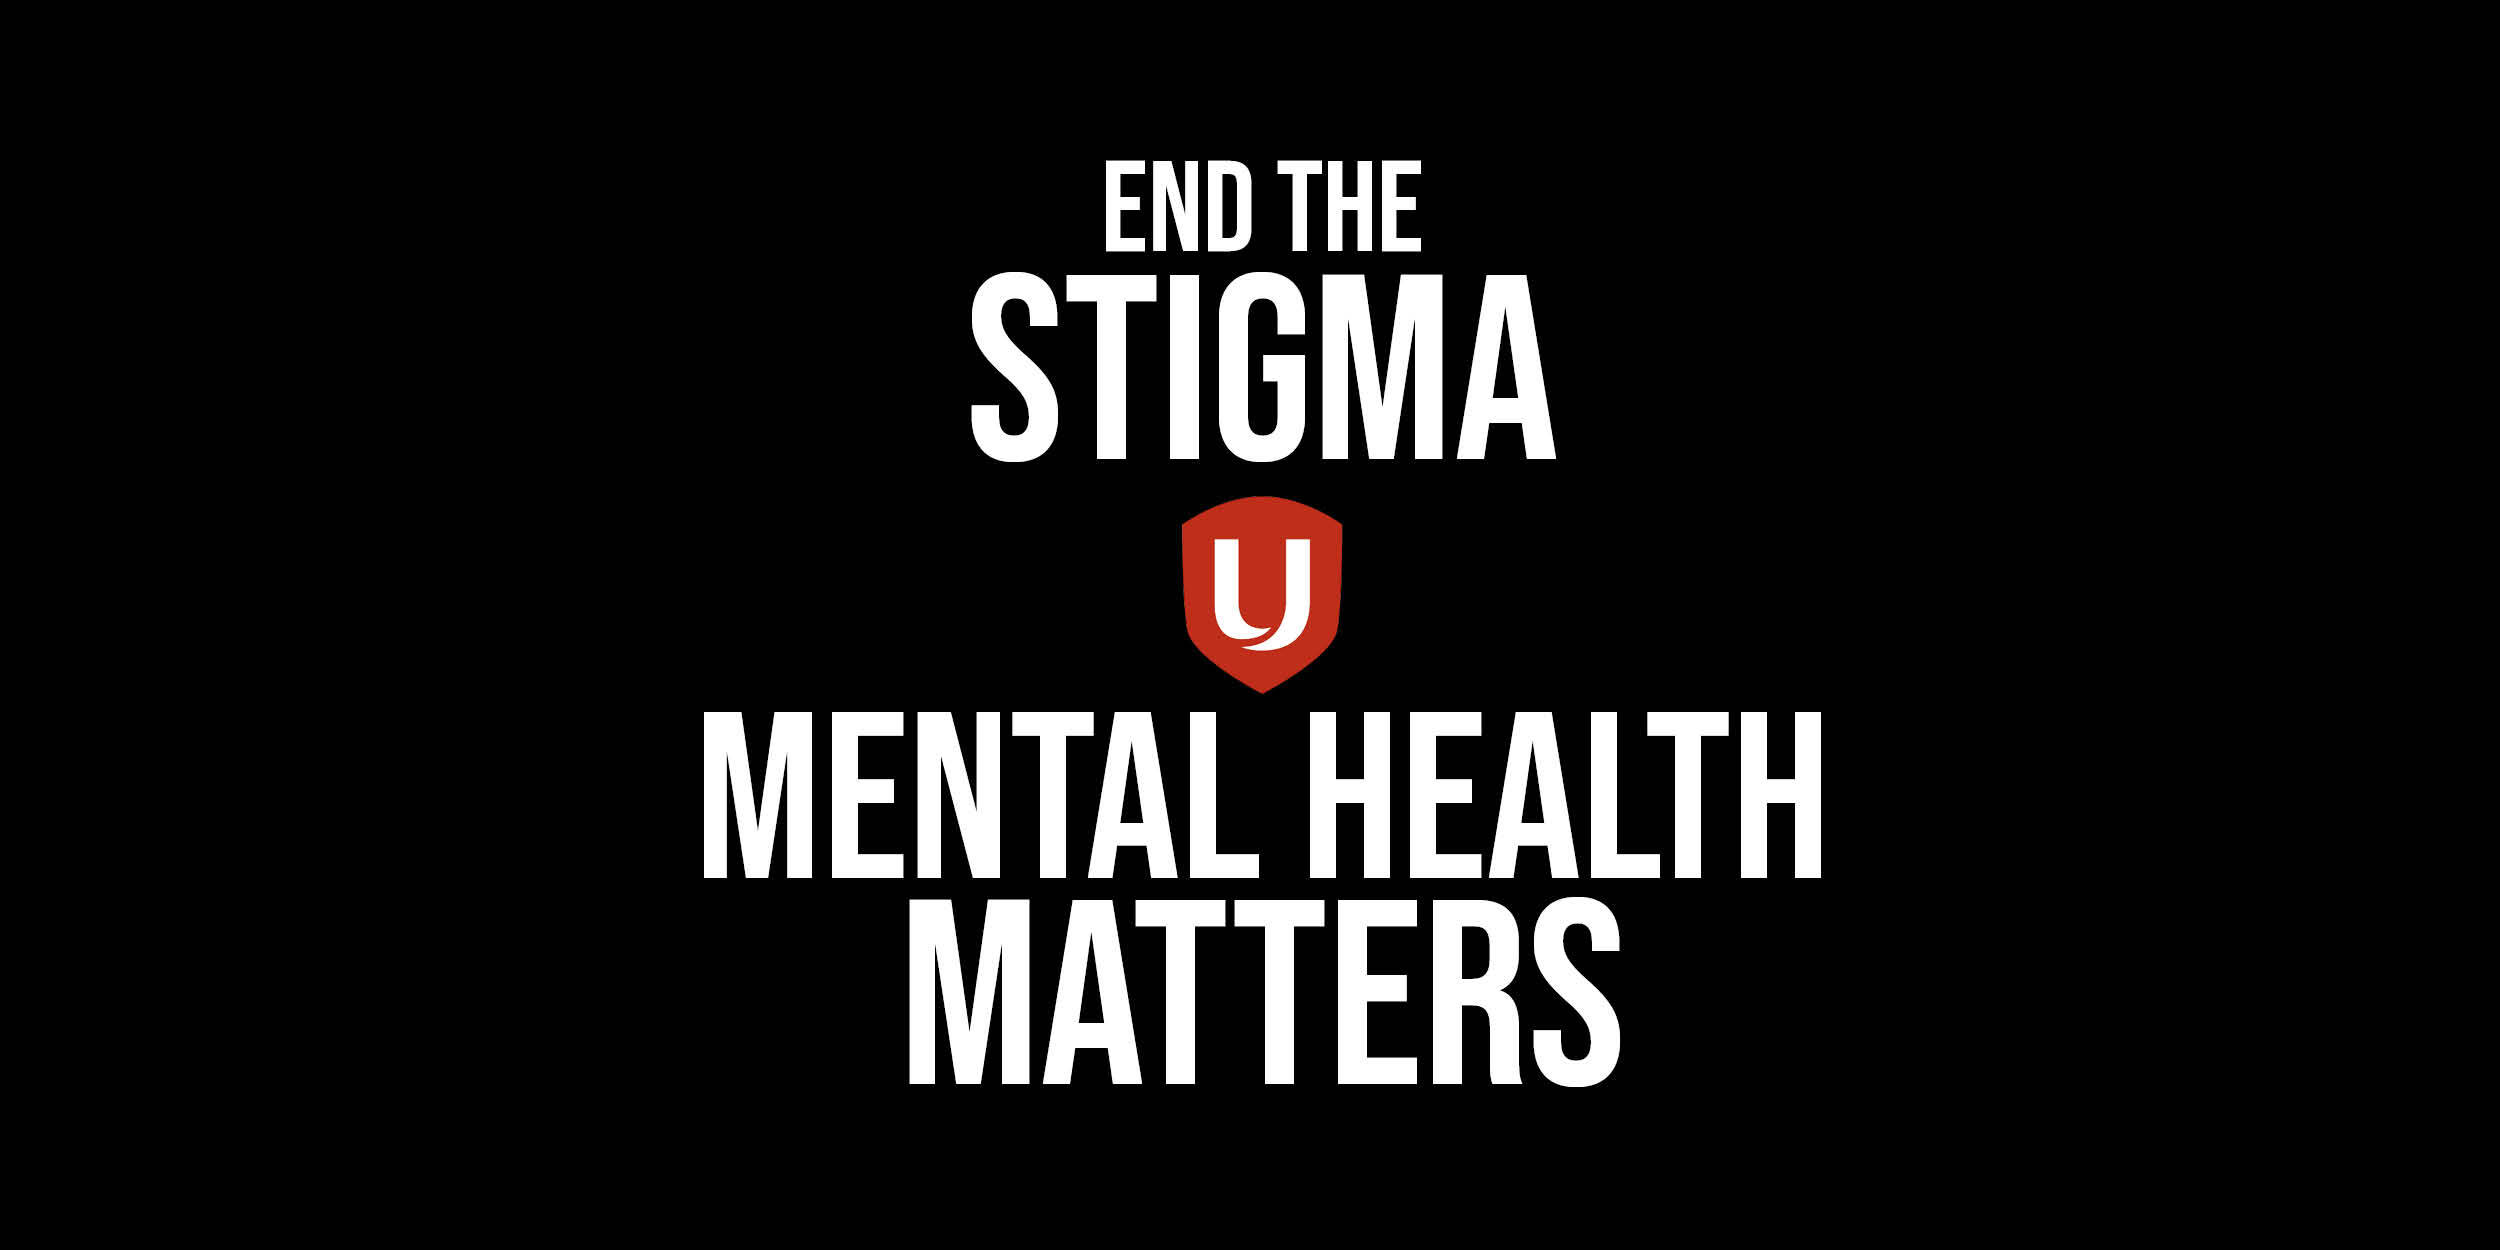 end the stigma, a red Unifor shield, mental health matters